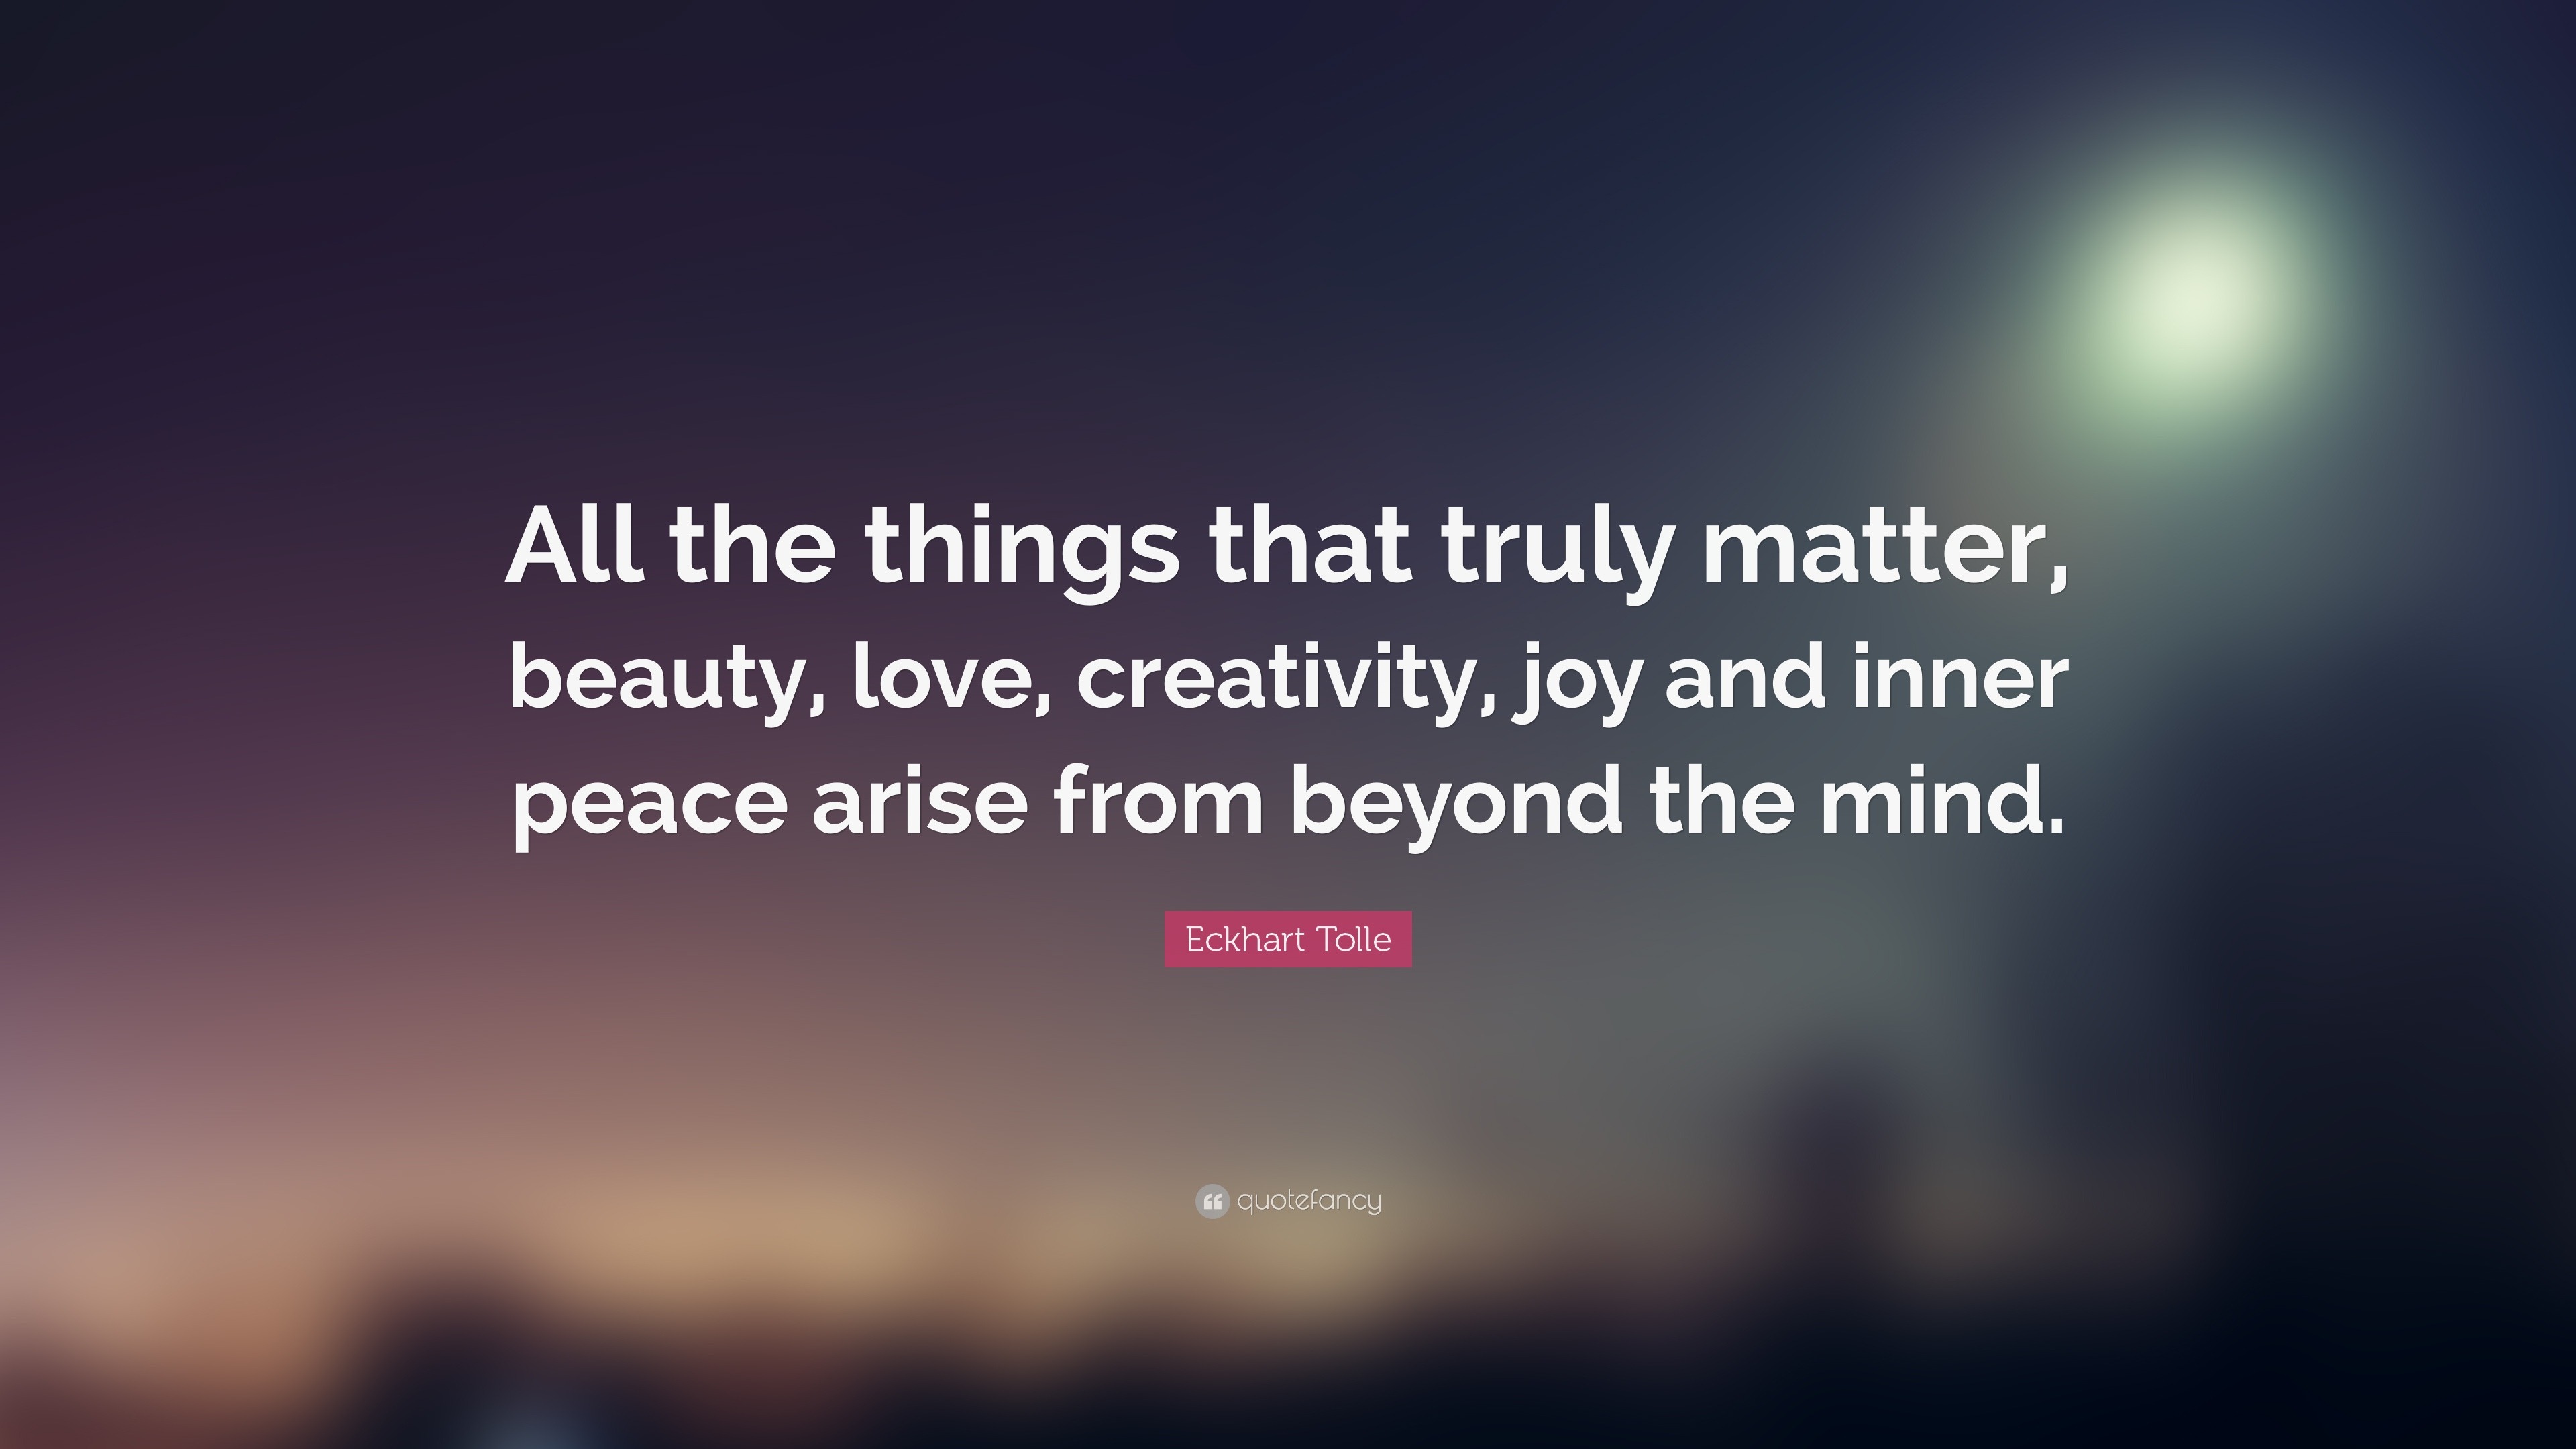 Eckhart Tolle Quote “All the things that truly matter beauty love